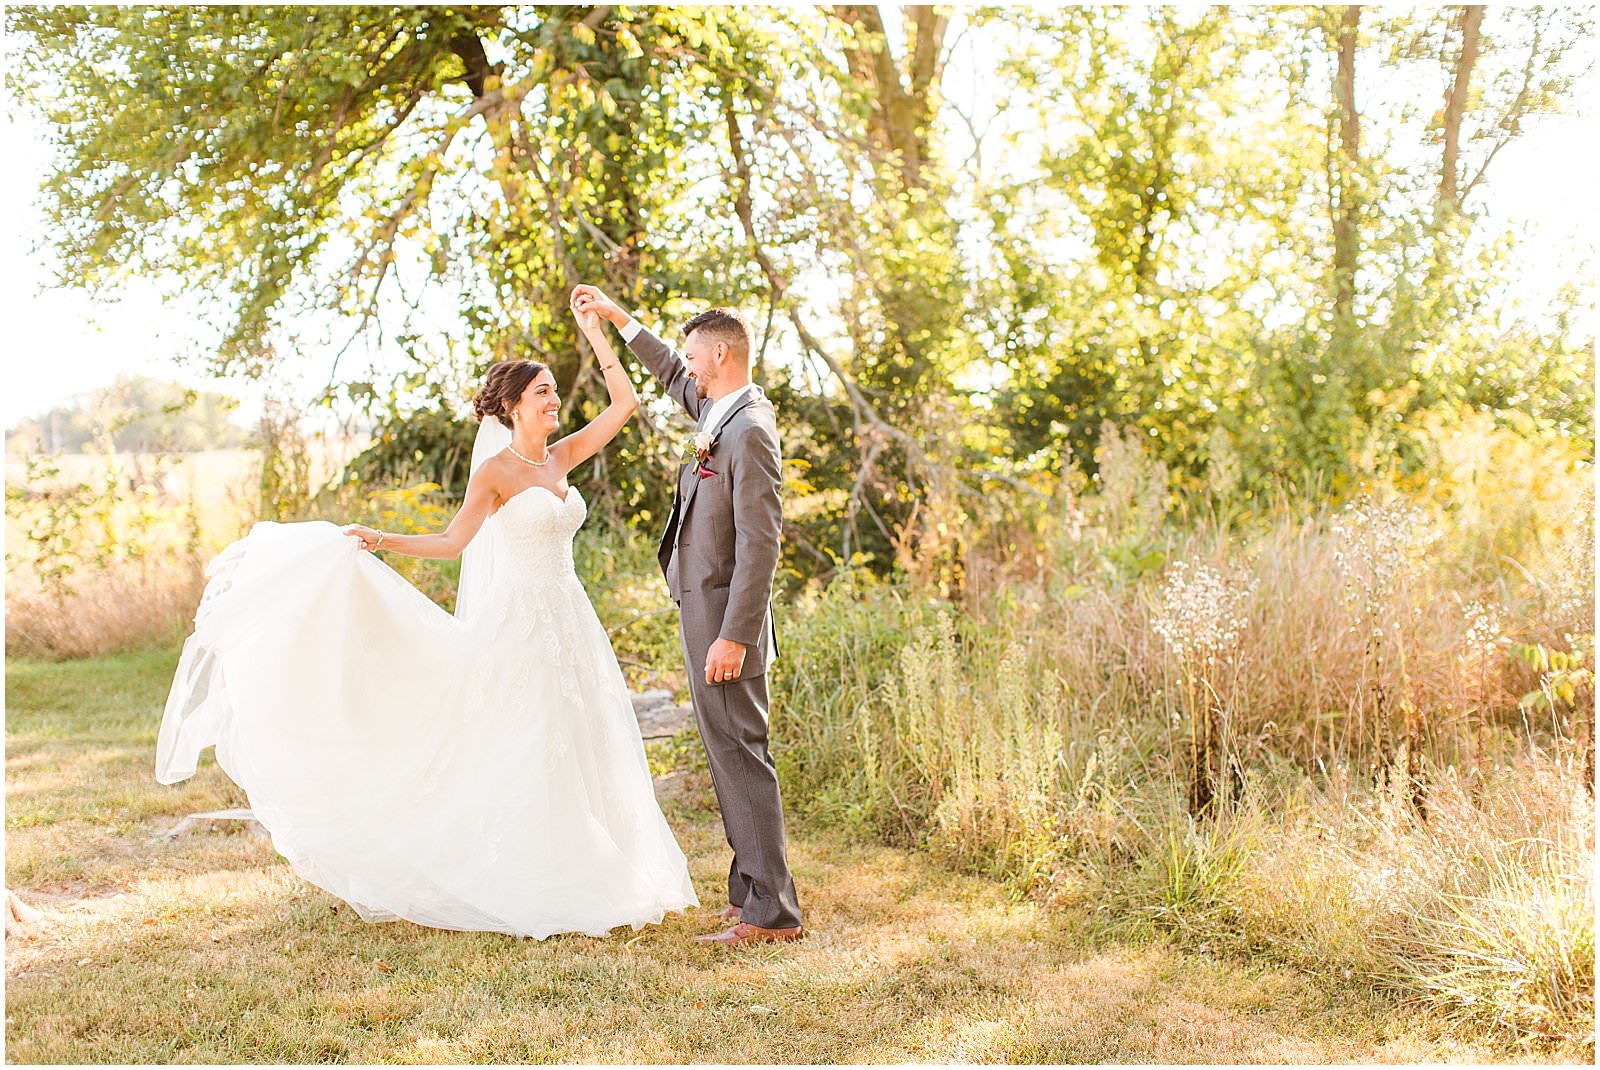 A Stunning Fall Wedding in Indianapolis, IN |. Sally and Andrew | Bret and Brandie Photography 0130.jpg